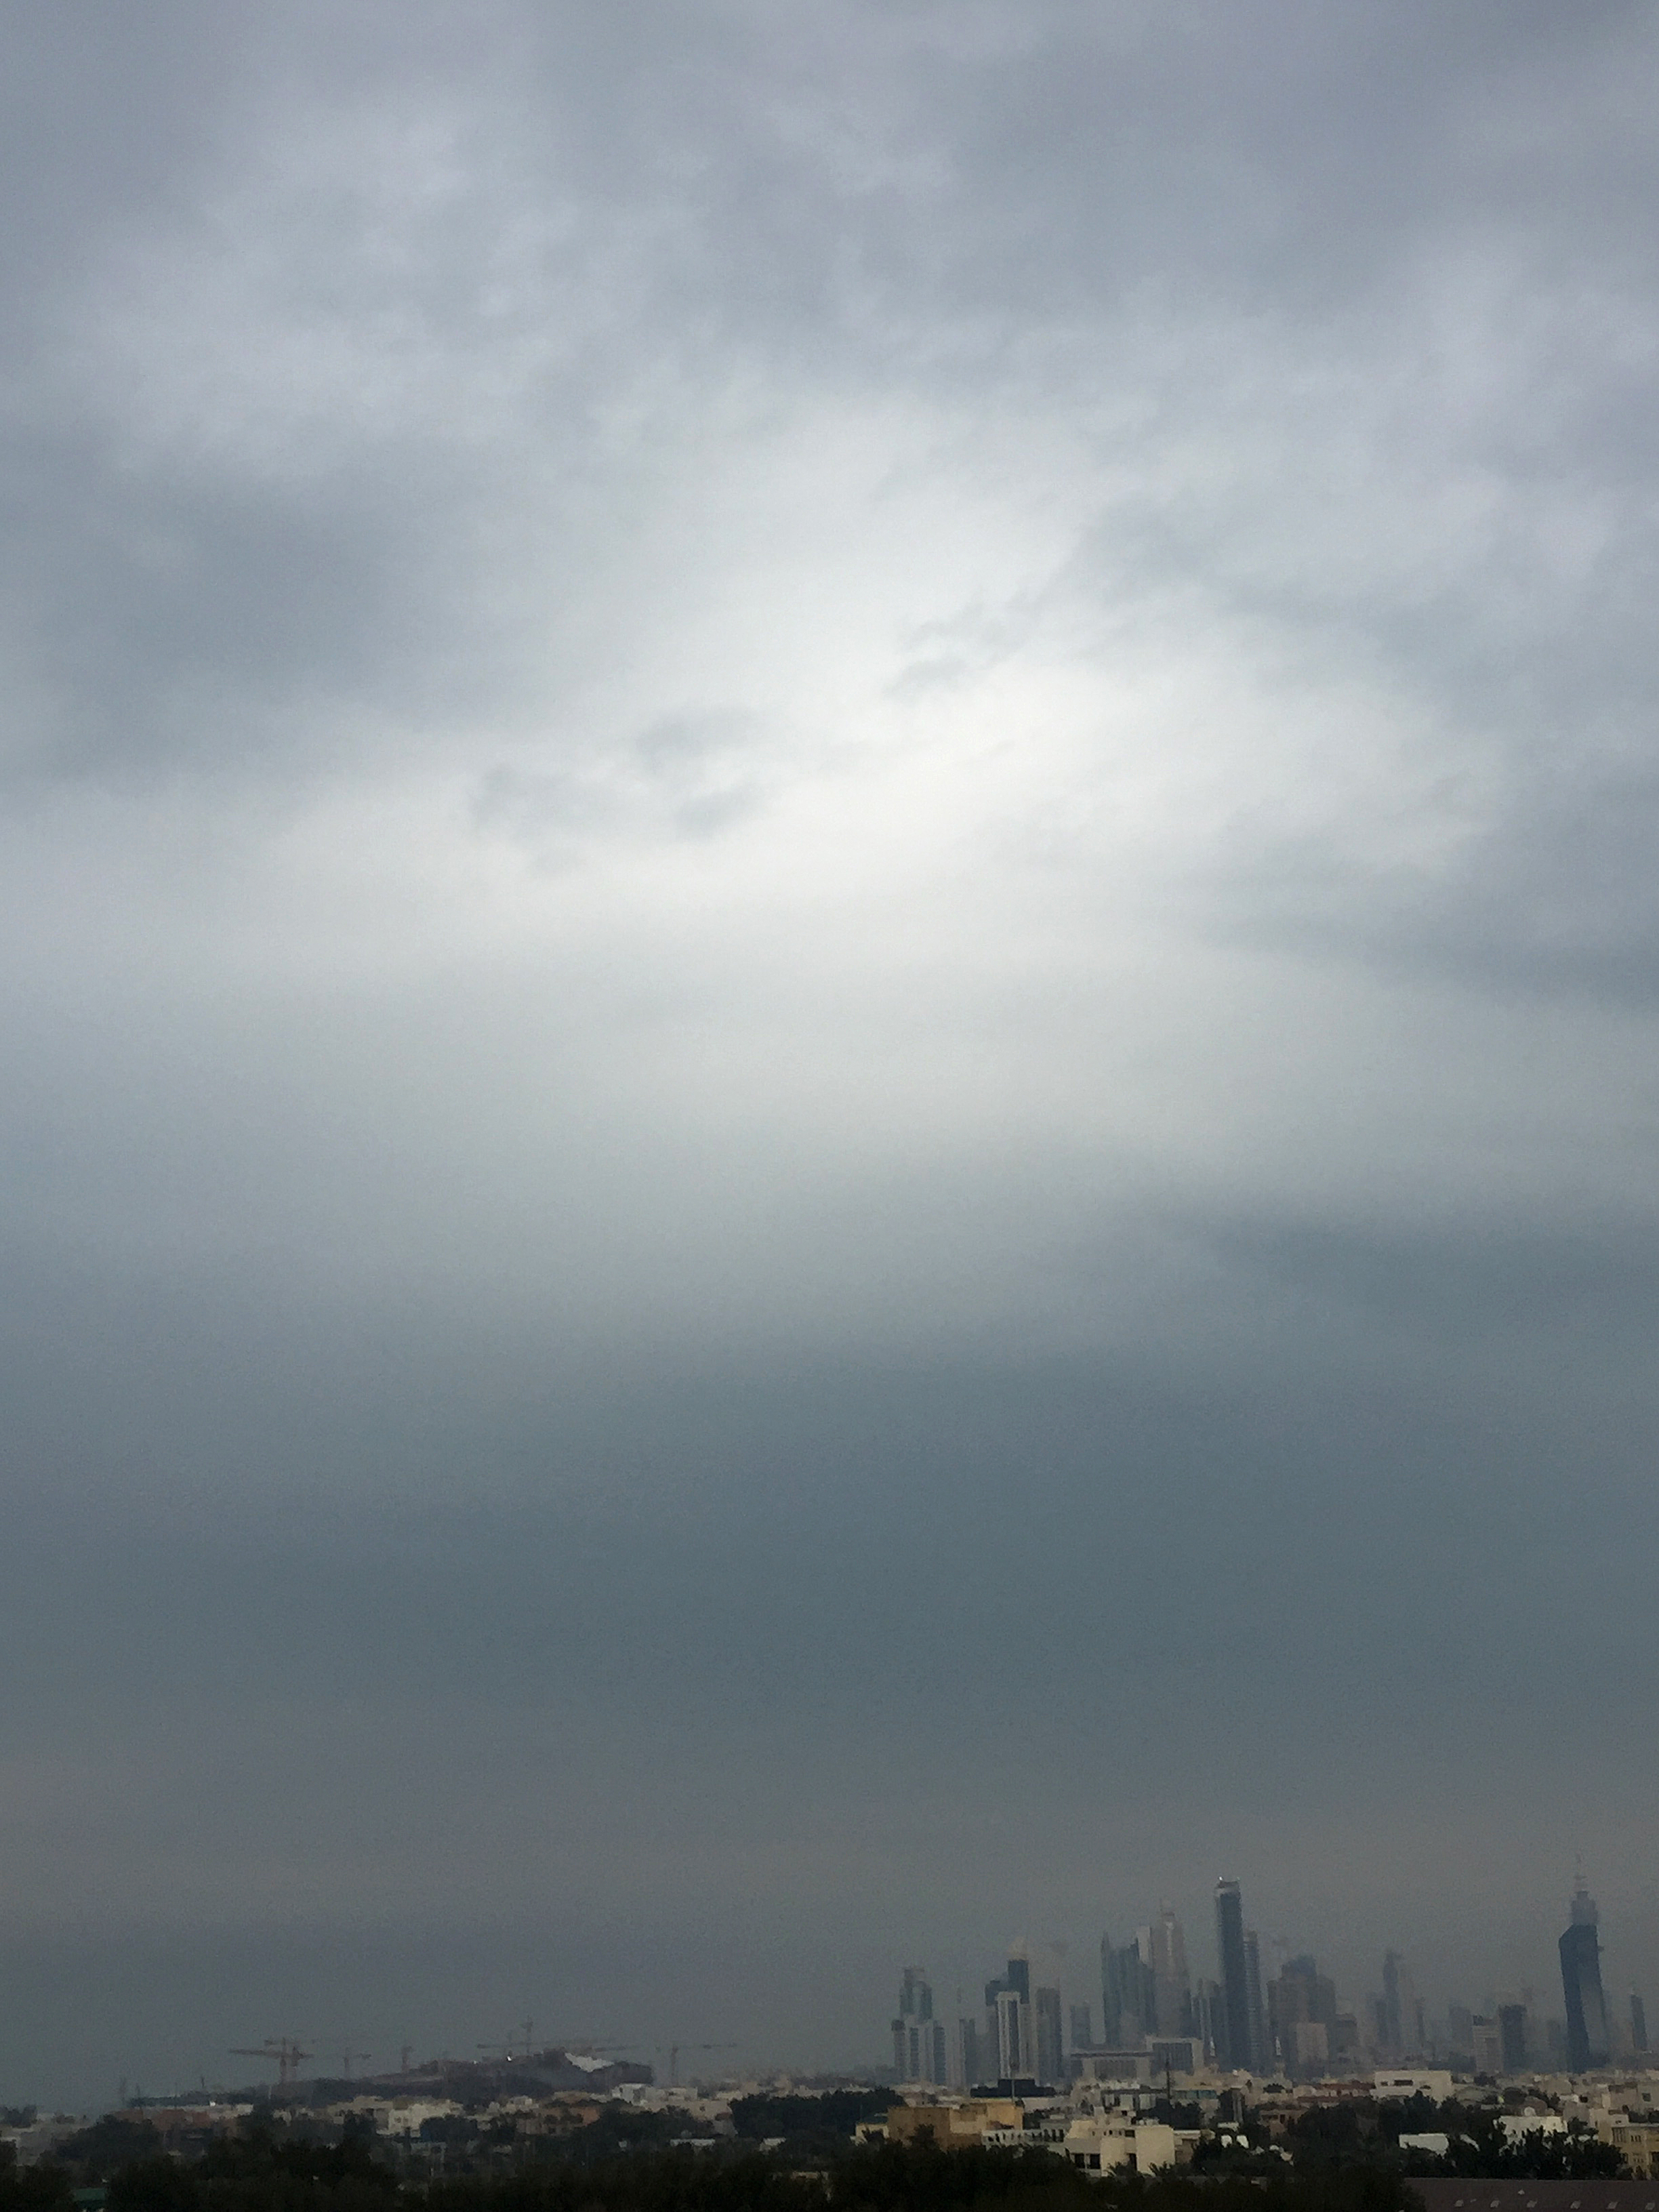 Kuwait now and in the coming 48 hours is witnessing clouds, expected to be accompanied by rain